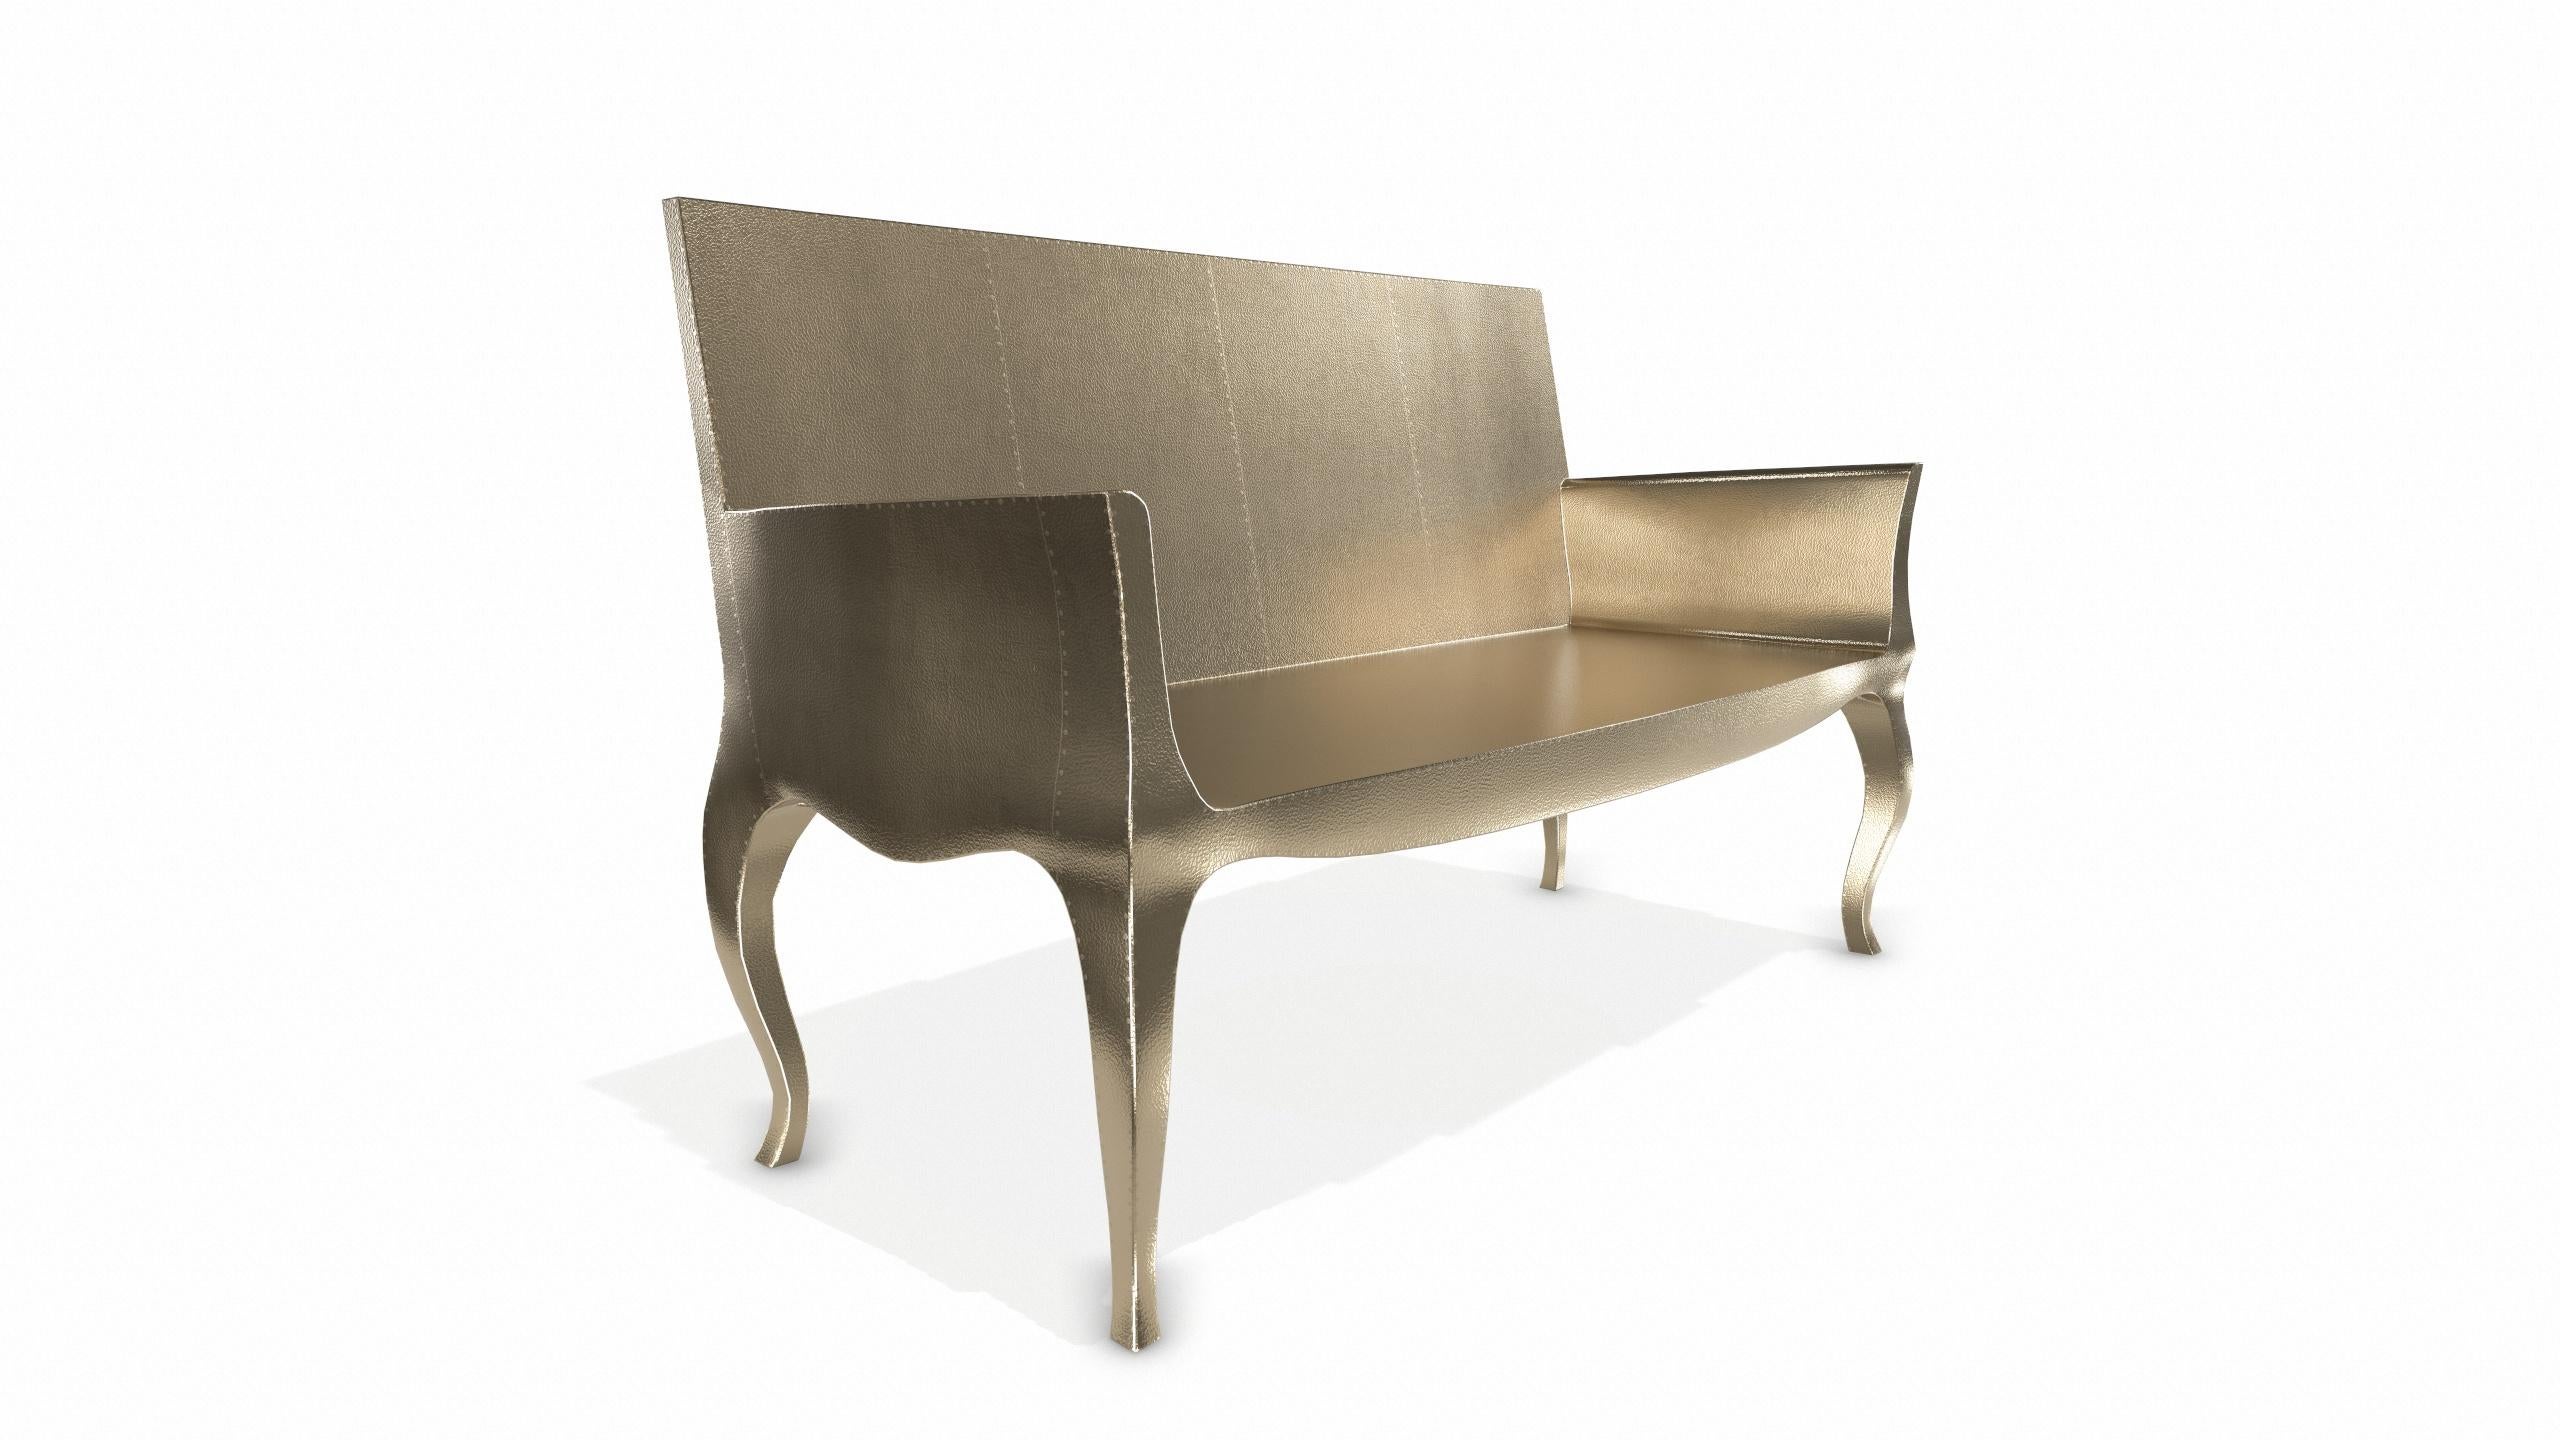 Louise Settee Art Deco Daybeds in Fine Hammered Brass by Paul Mathieu In New Condition For Sale In New York, NY